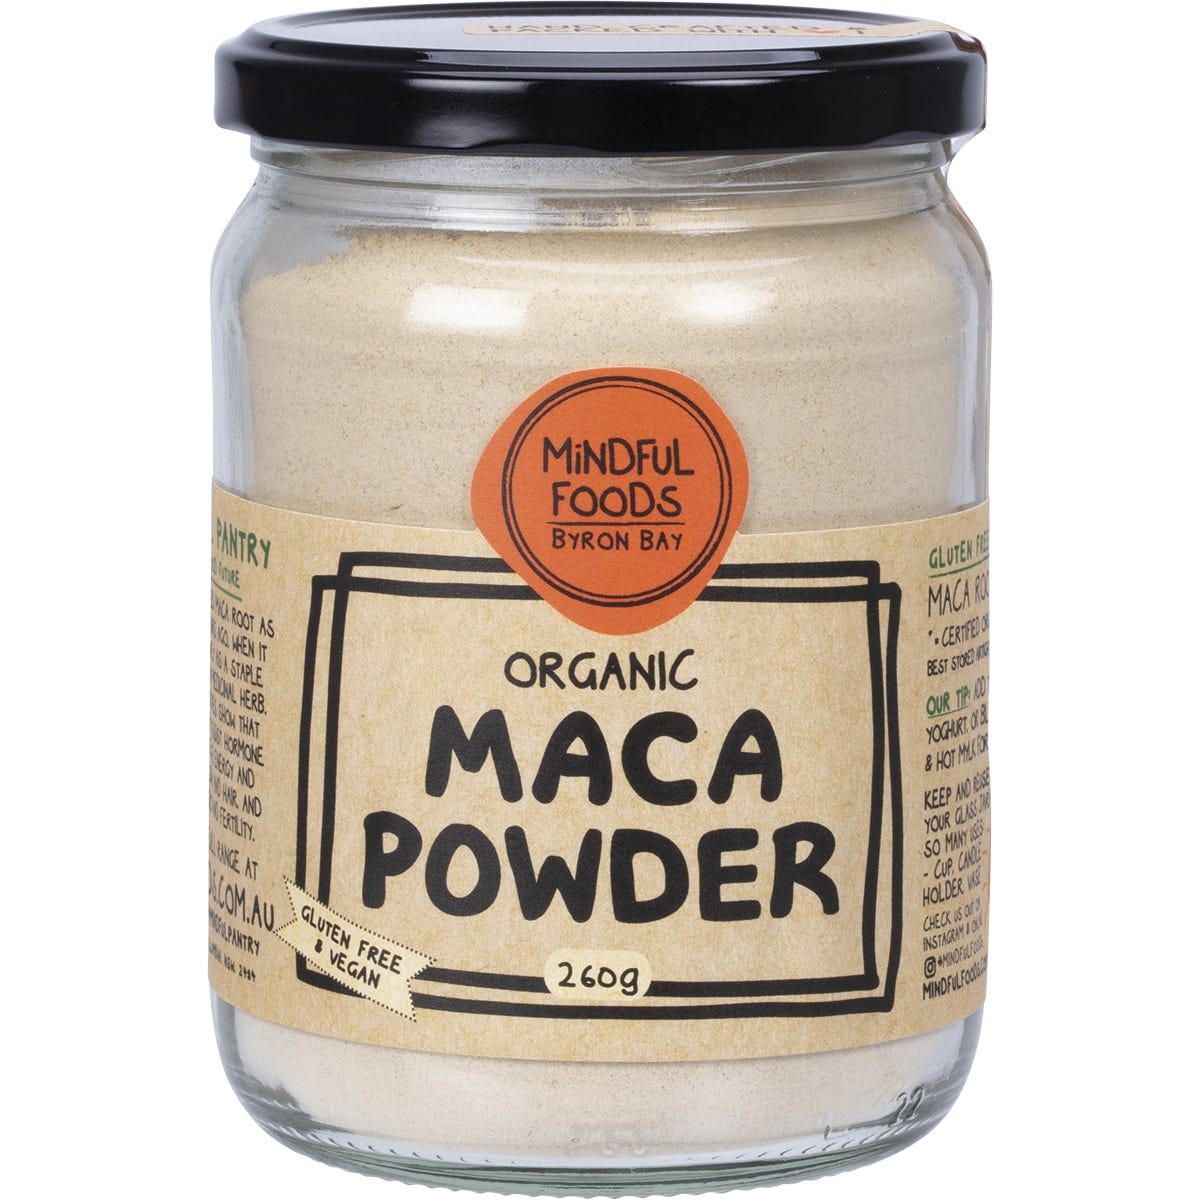 Mindful Foods Maca Powder Organic 260g - Dr Earth - Other Superfoods